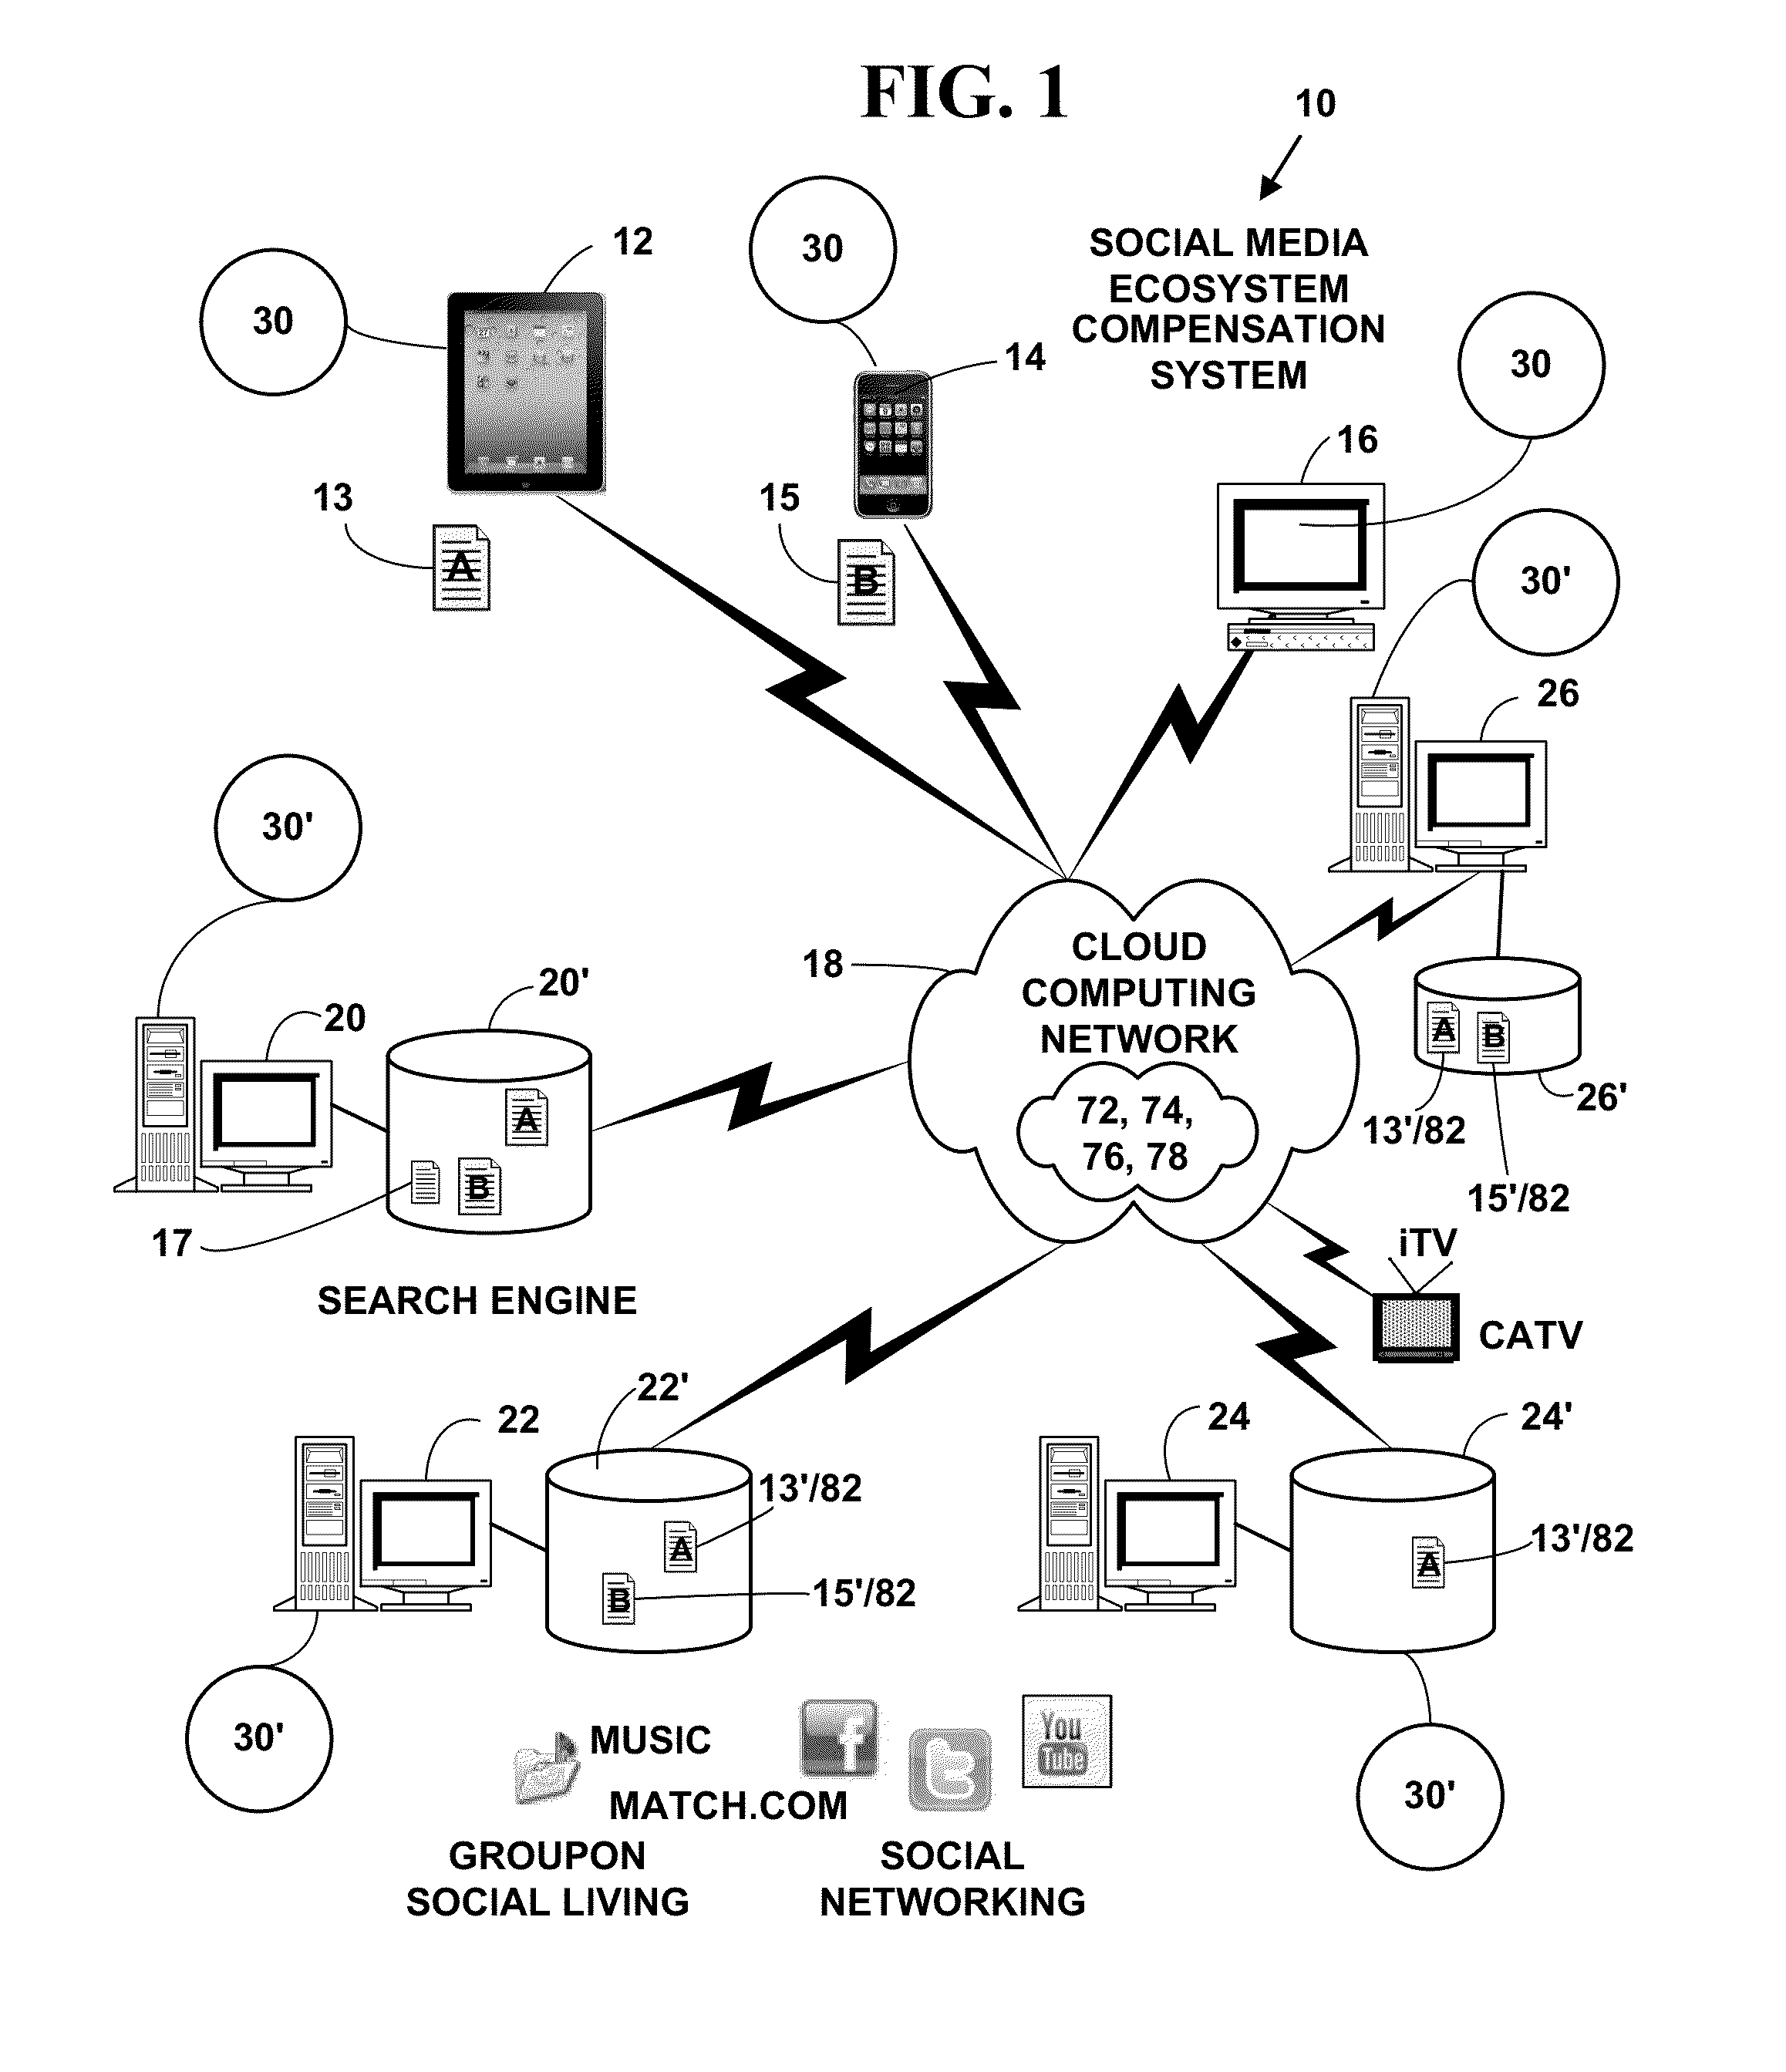 Method and system for providing social media ecosystem compensation